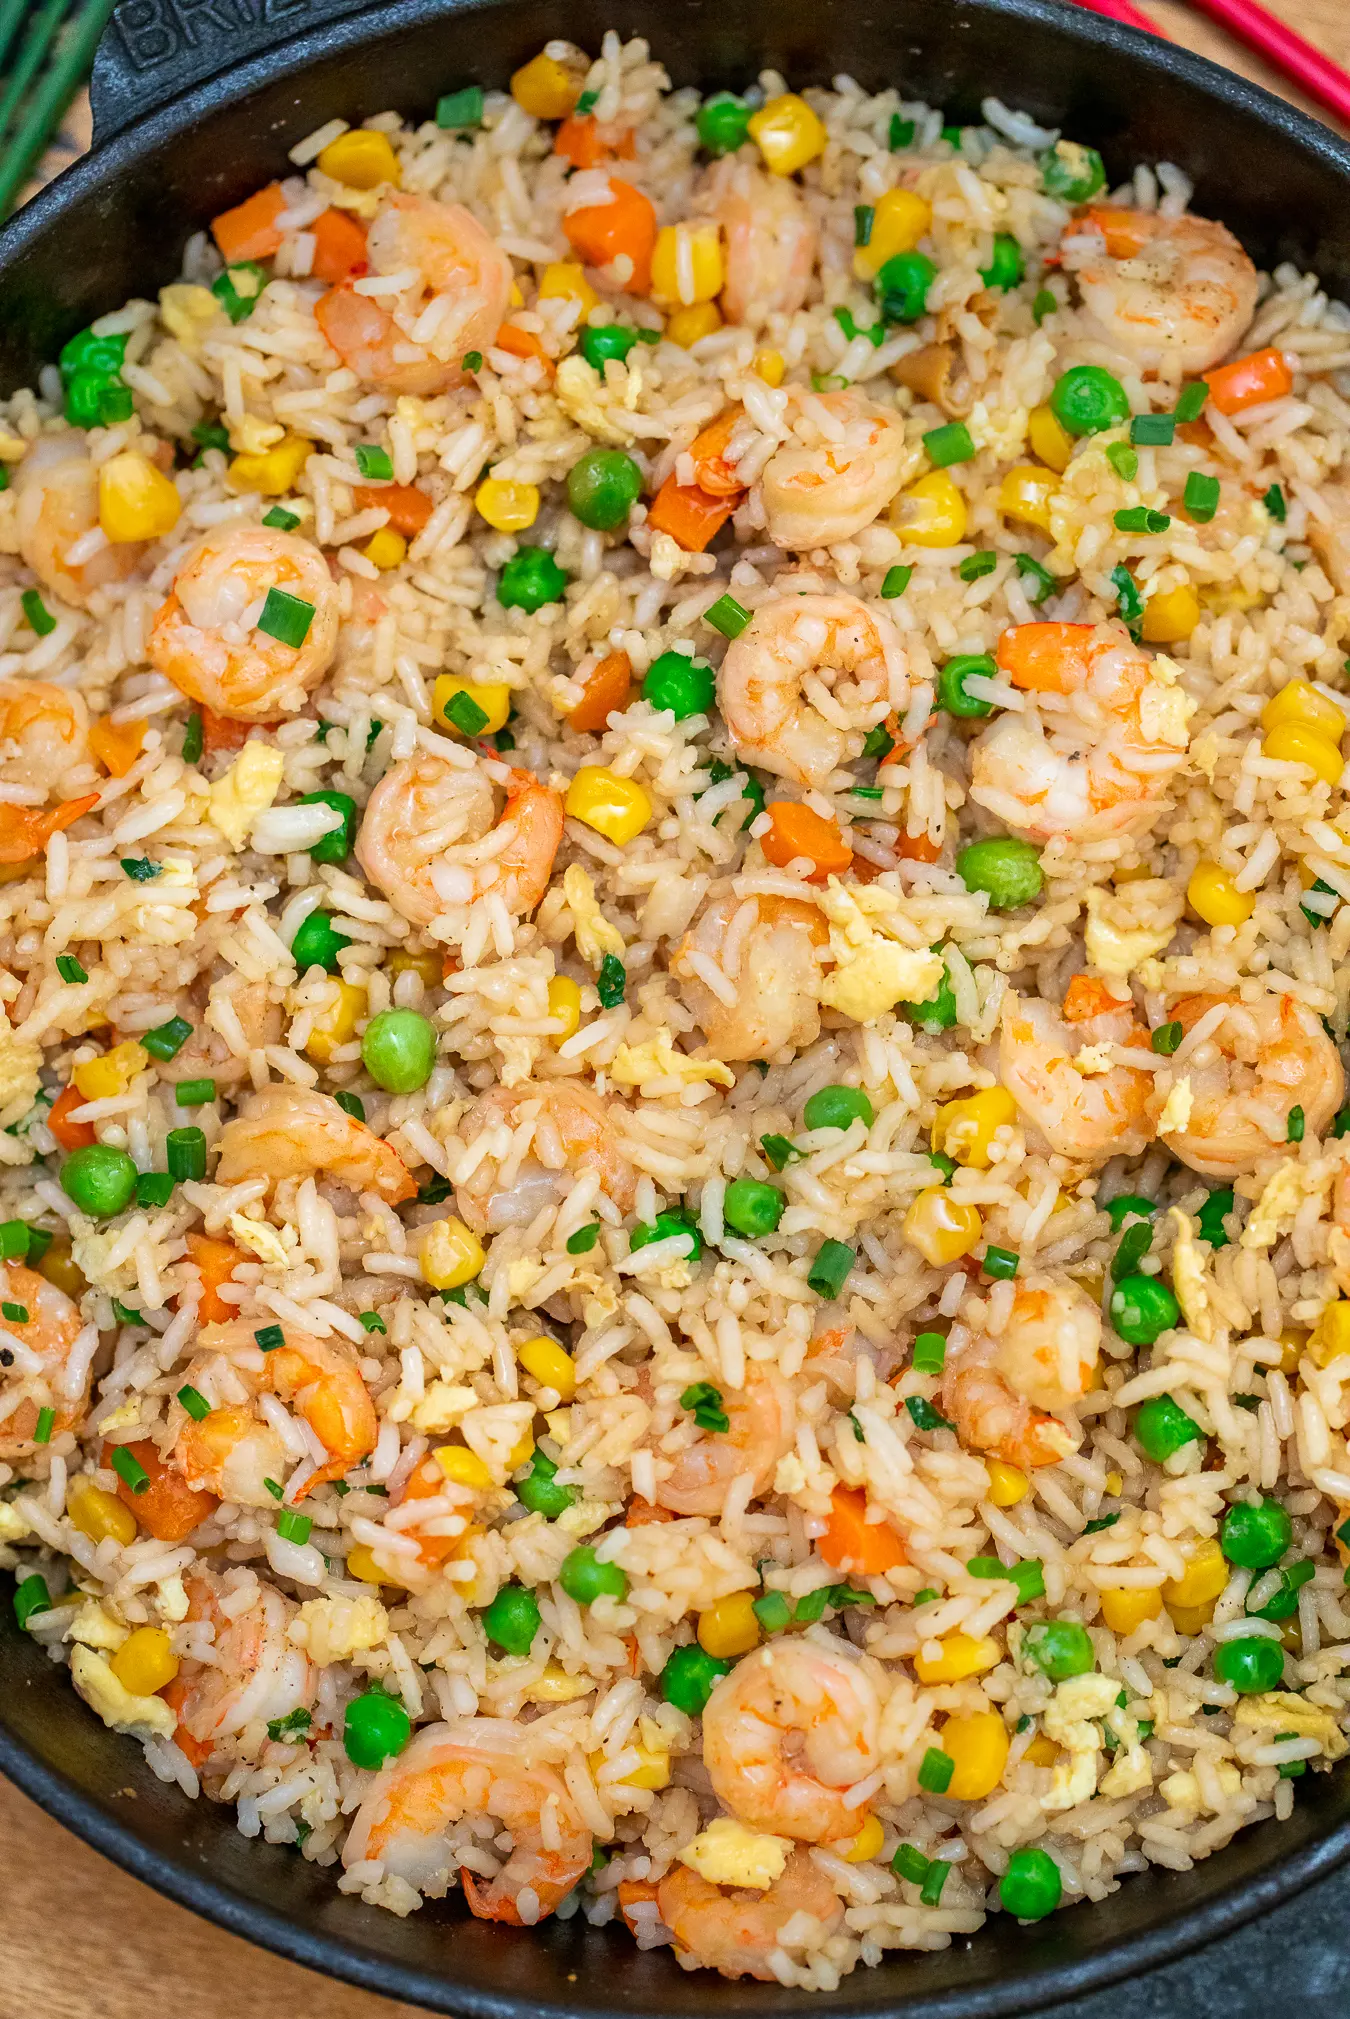 Shrimp Fried Rice Recipe [video] - Sweet and Savory Meals